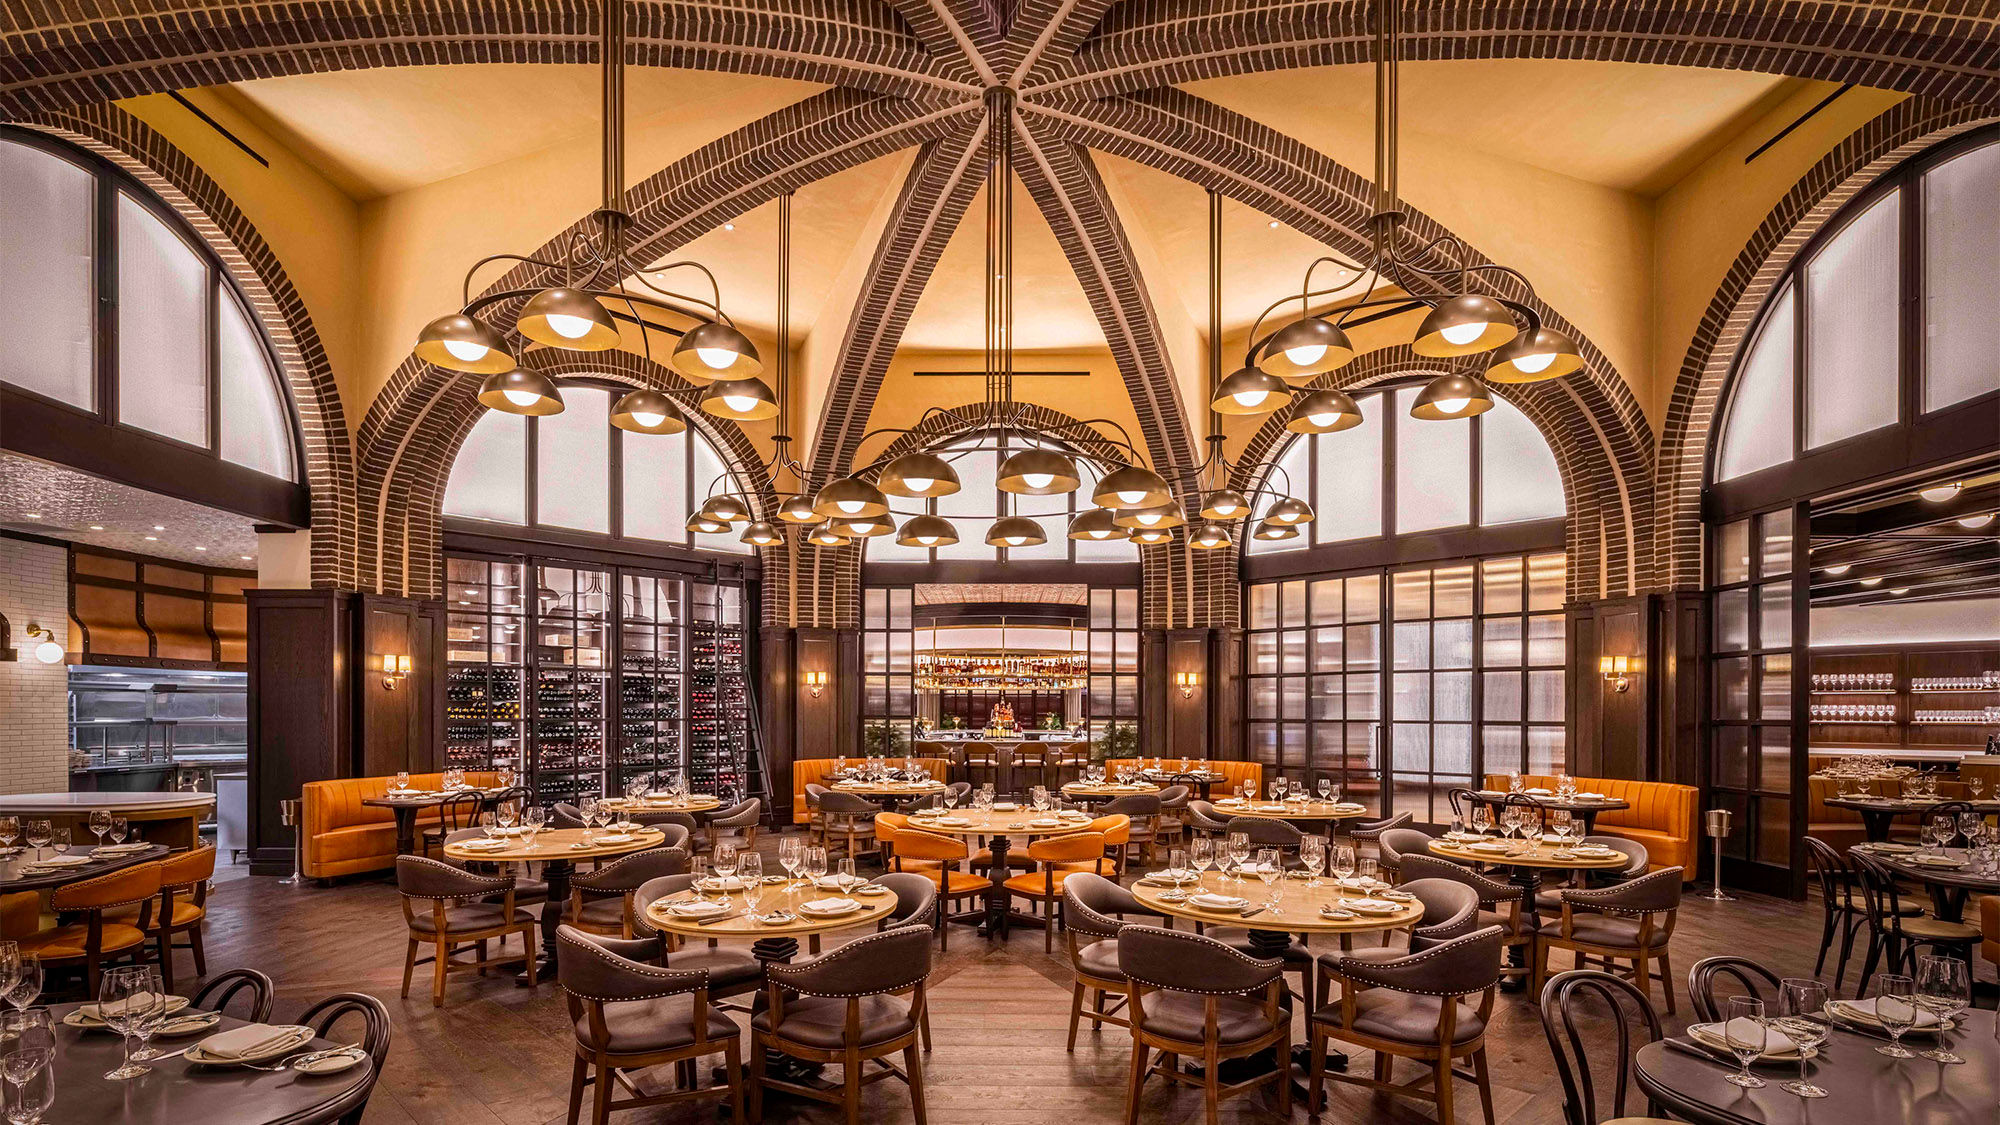 The Peter Luger Steak House Las Vegas at Caesars Palace is inspired by the company’s original Brooklyn location.